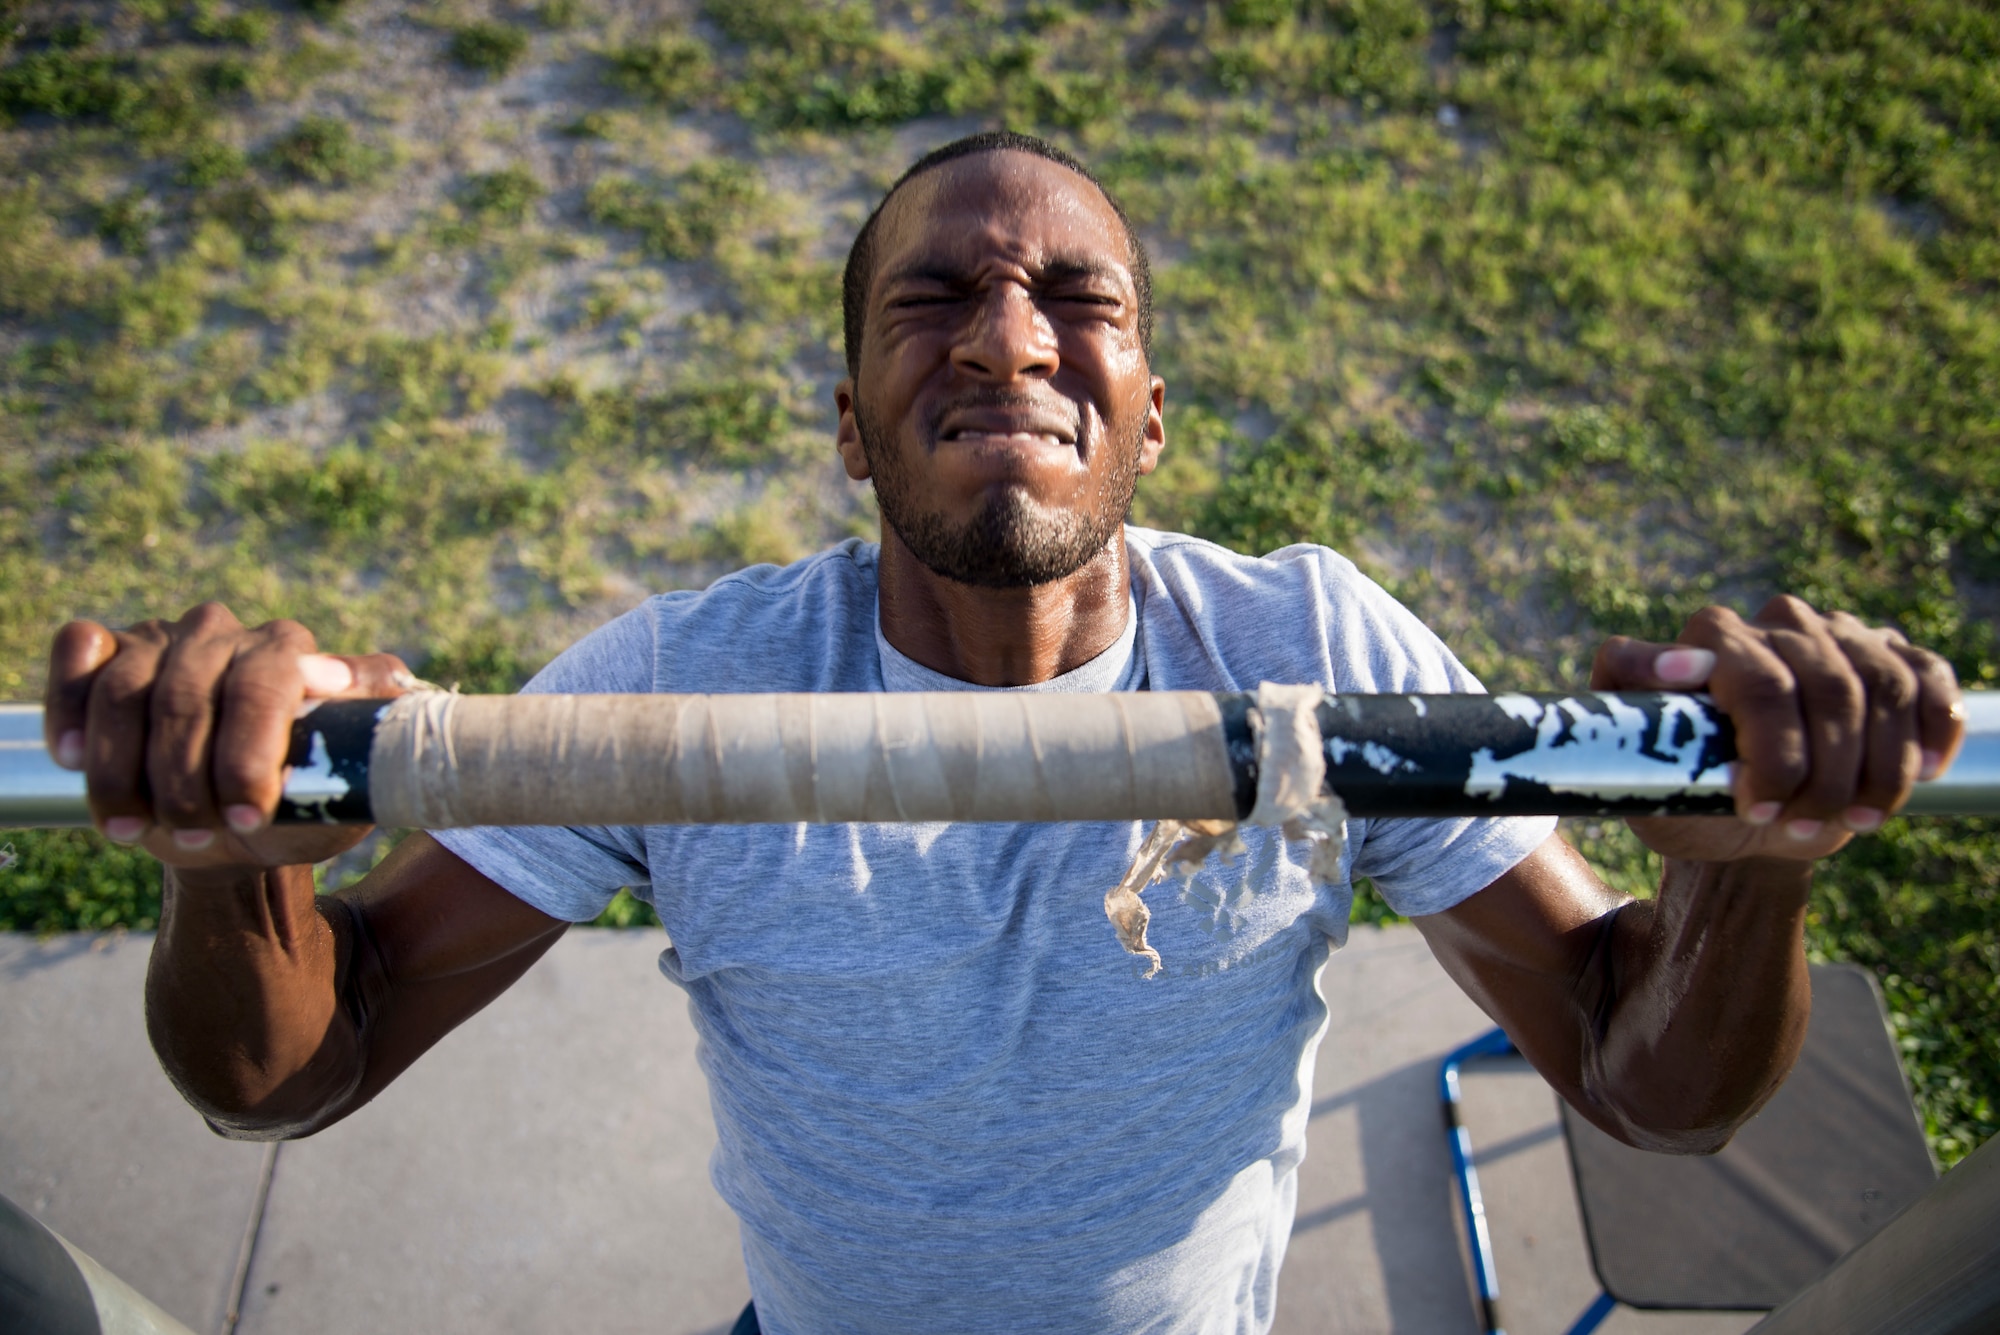 U.S. Air Force Airman 1st Class Quon Green, an entry controller assigned to the 6th Security Force Squadron, performs a pull up at MacDill Air Force Base, Florida, July 17, 2018.